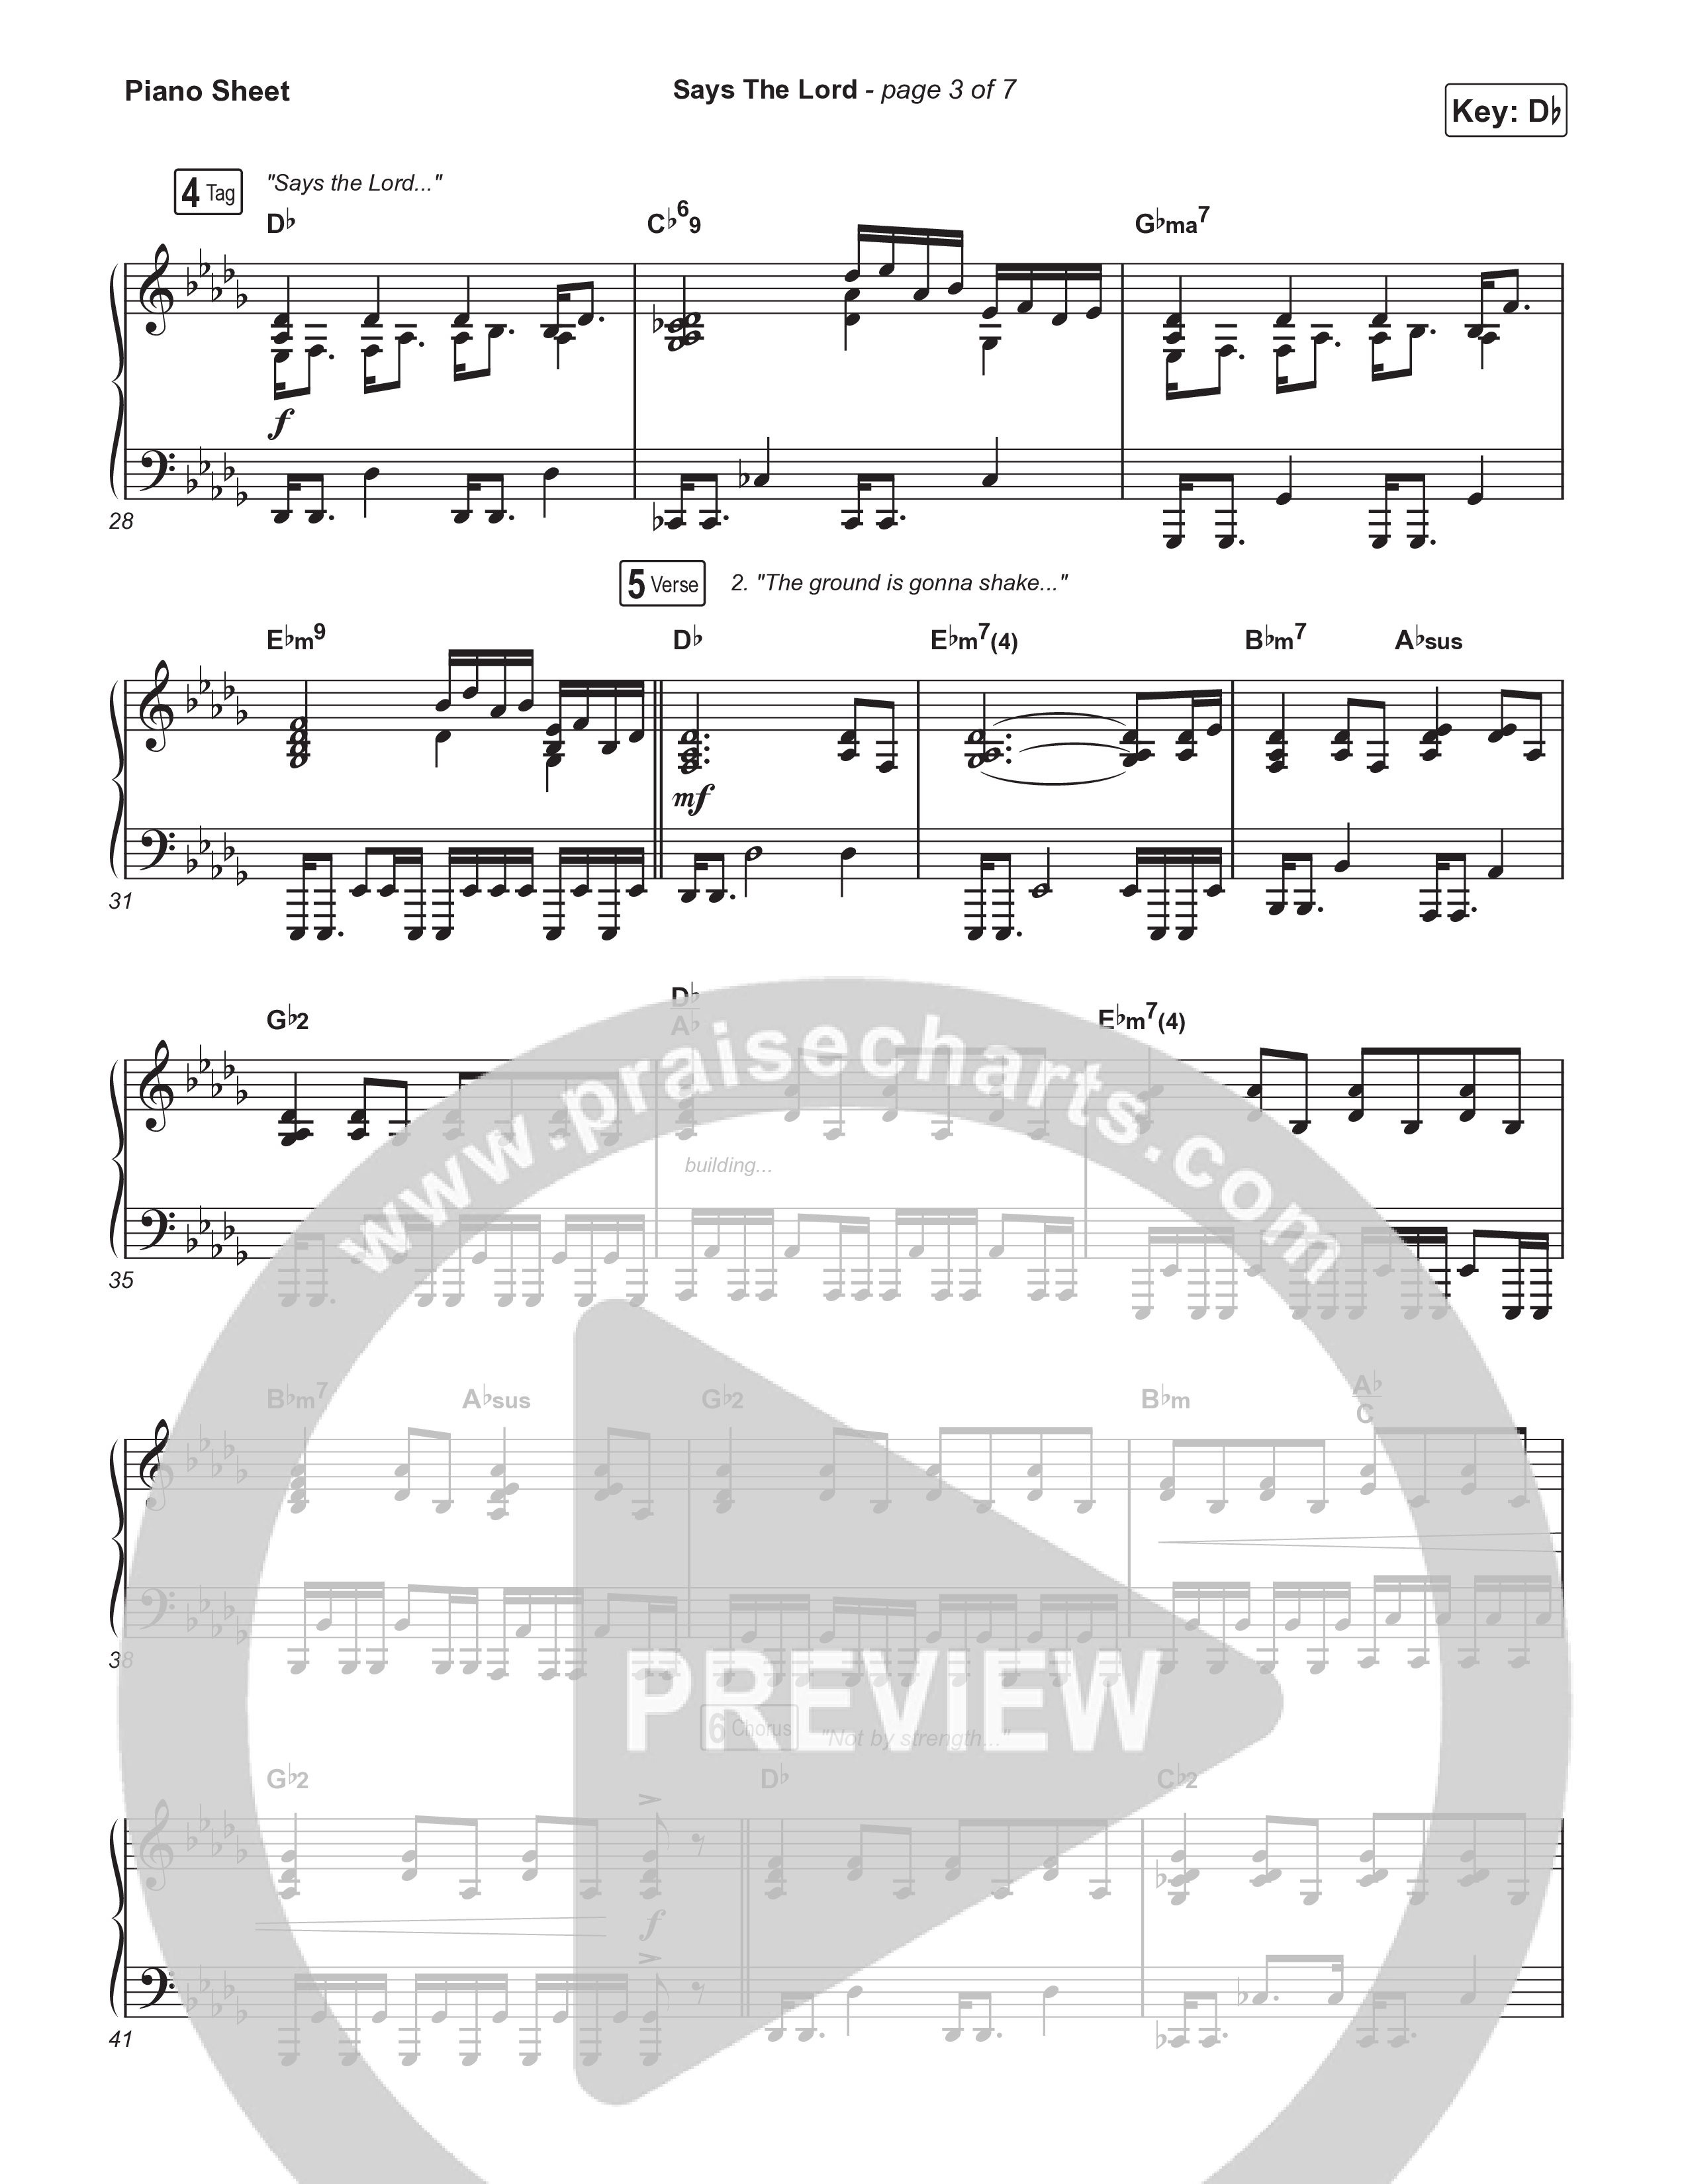 Says The Lord (Live) Piano Sheet (The Belonging Co / Andrew Holt)